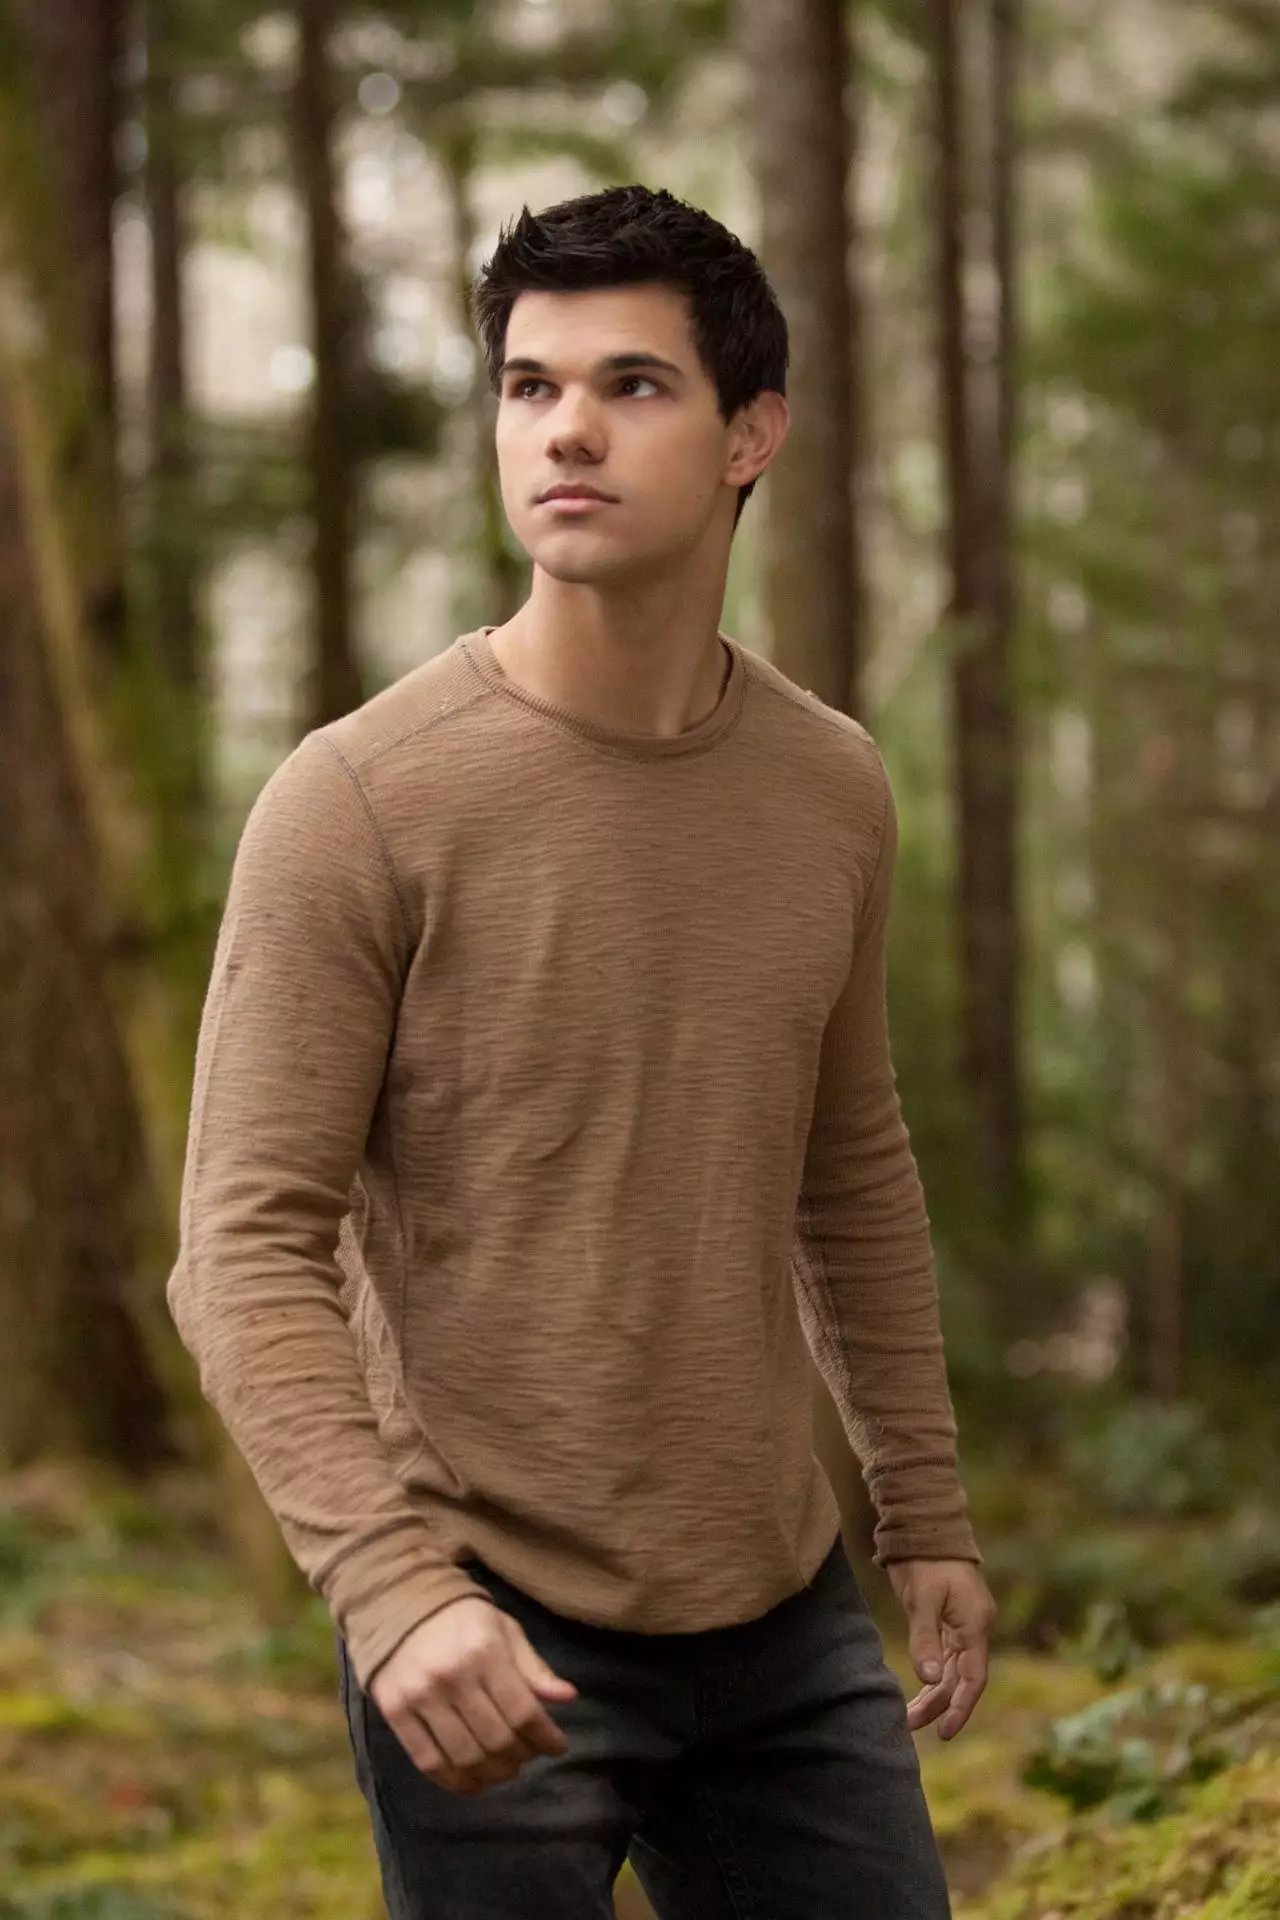 Taylor Lautner also starred as Jacob (